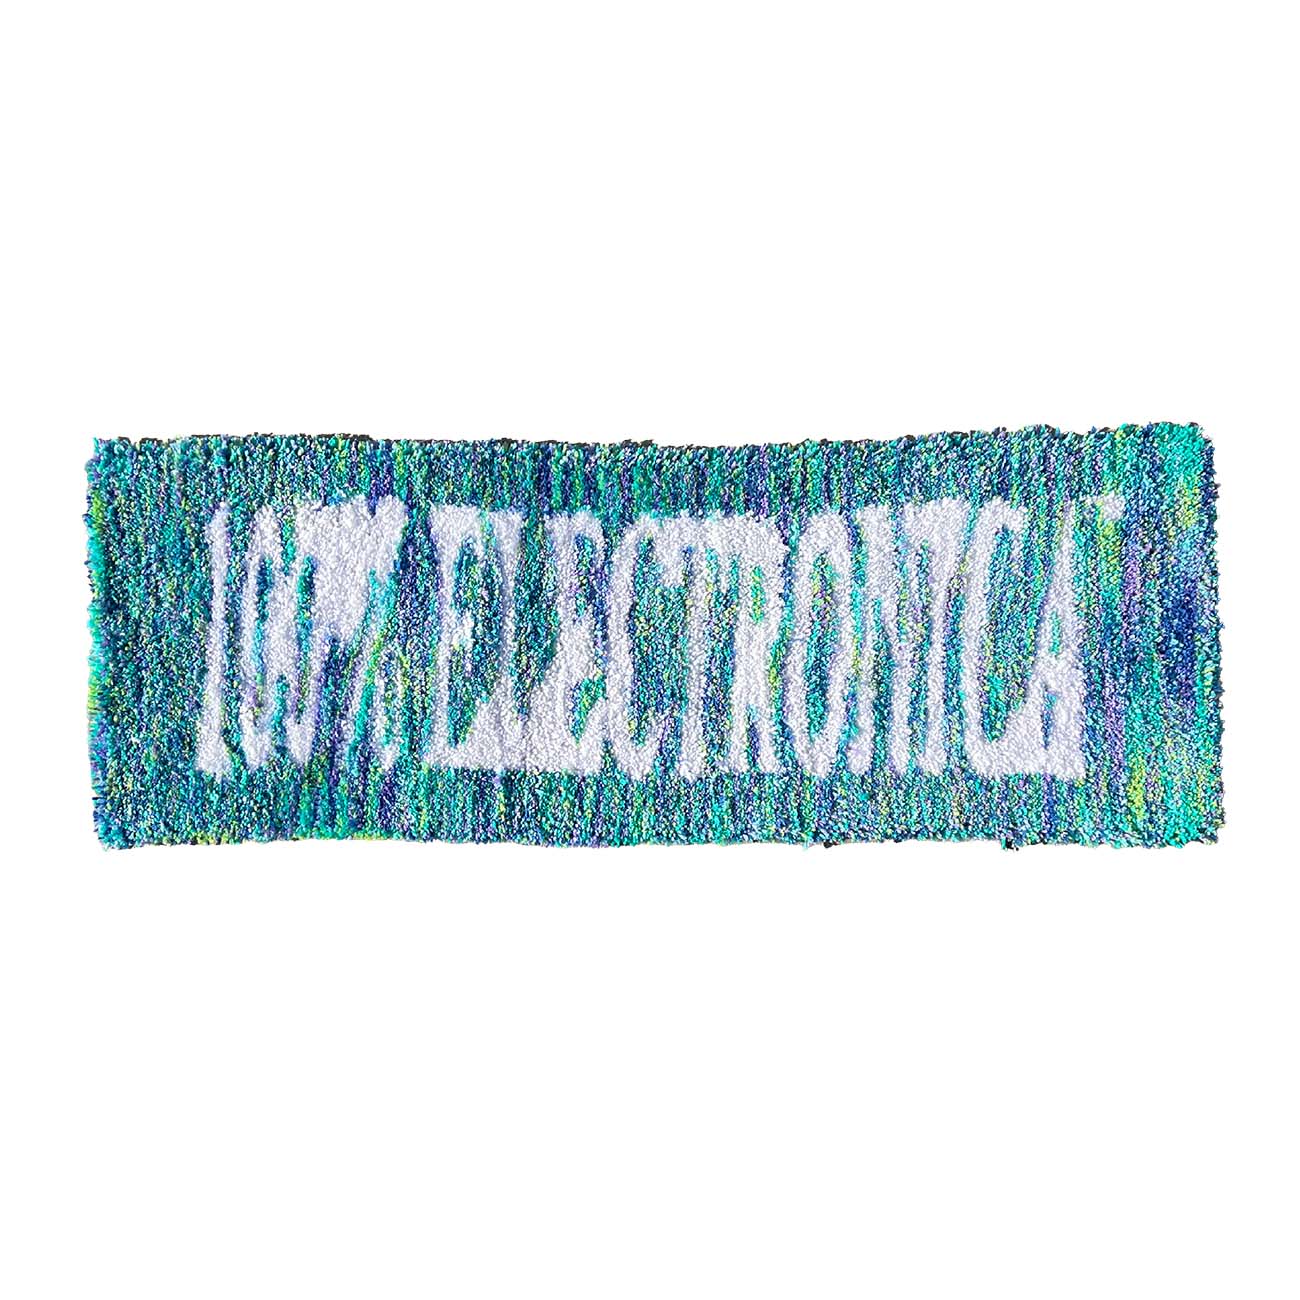 "Sully and Mike Type Beat" 100% Electronica Logo Rug by Adam Kane